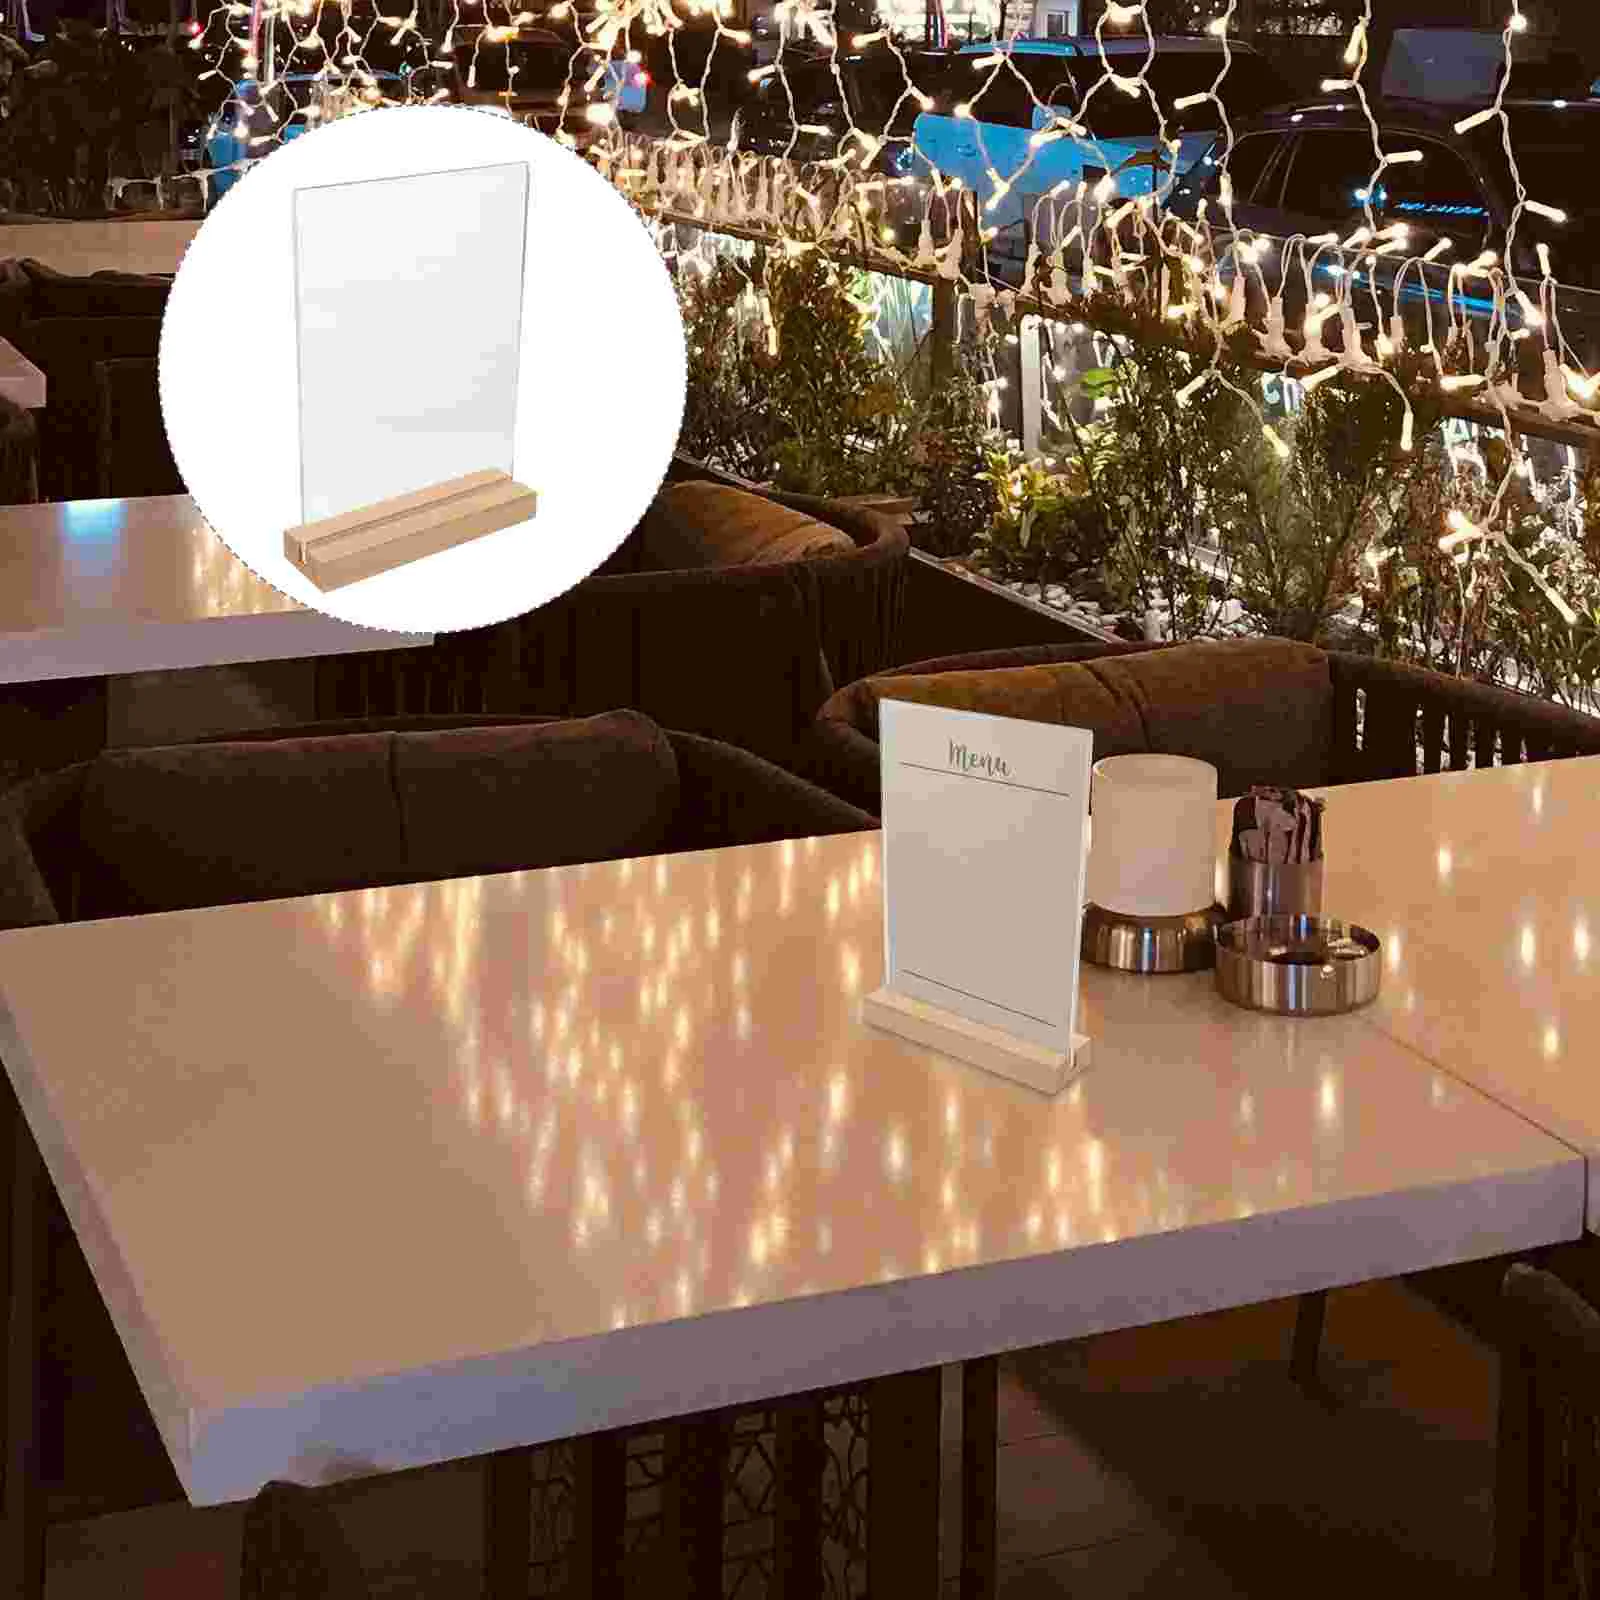 Clear Menu Display Stand Desktop Poster Holder Acrylic Sign Holder for Restaurants with Wood Base 50x40mm wood mini slant sign holder display stand photo picture frame table acrylic clear price label card holder tags